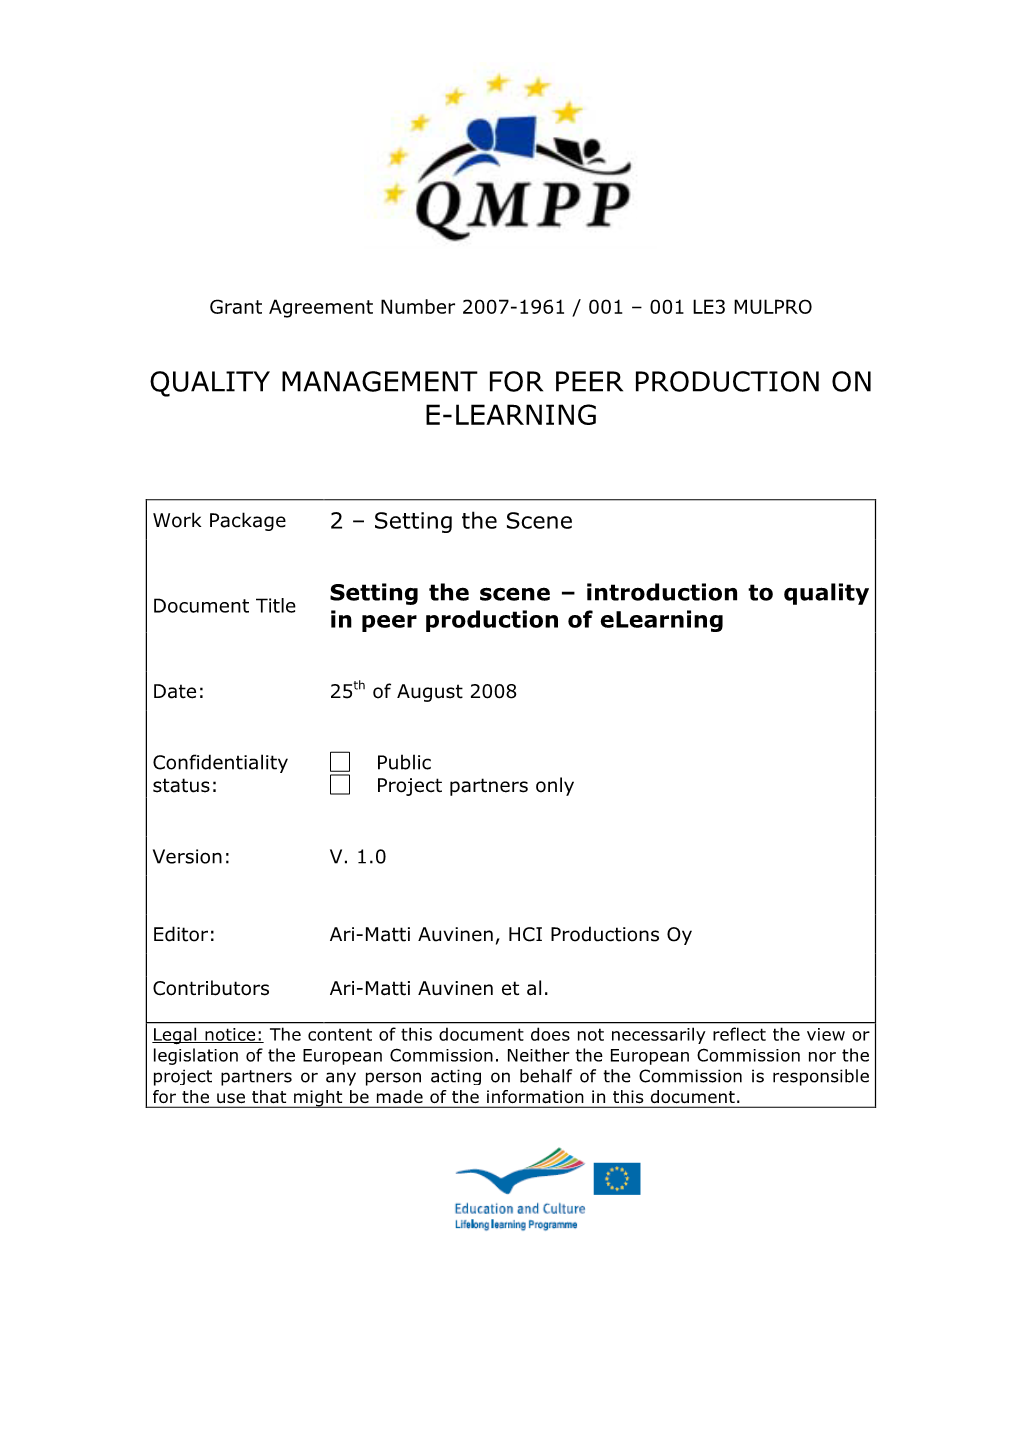 Quality Management for Peer Production on E-Learning